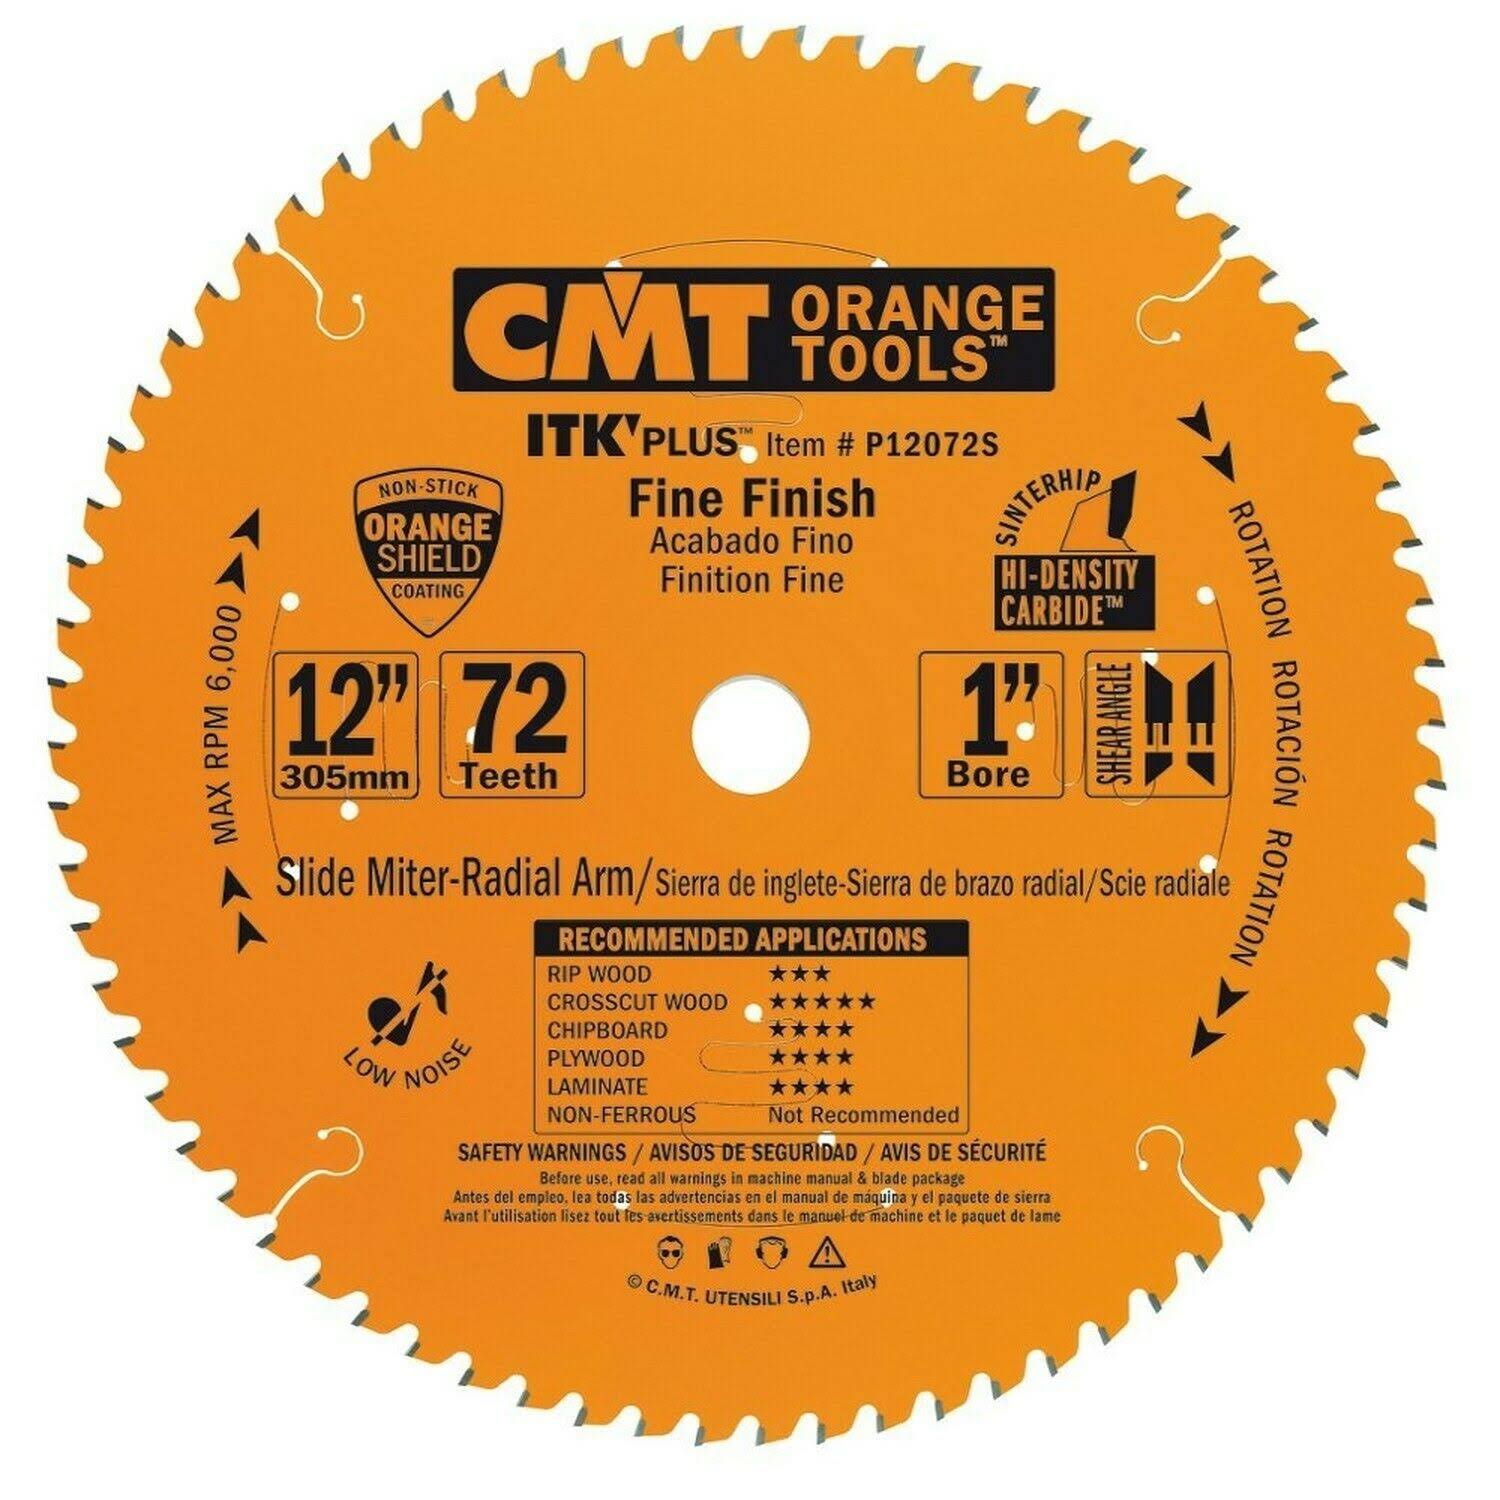 CMT P12072S ITK Plus Finish Sliding Compound Saw Blade, 12 x 72 Teeth, 10 ATB+Shear with 1-Inch Bore